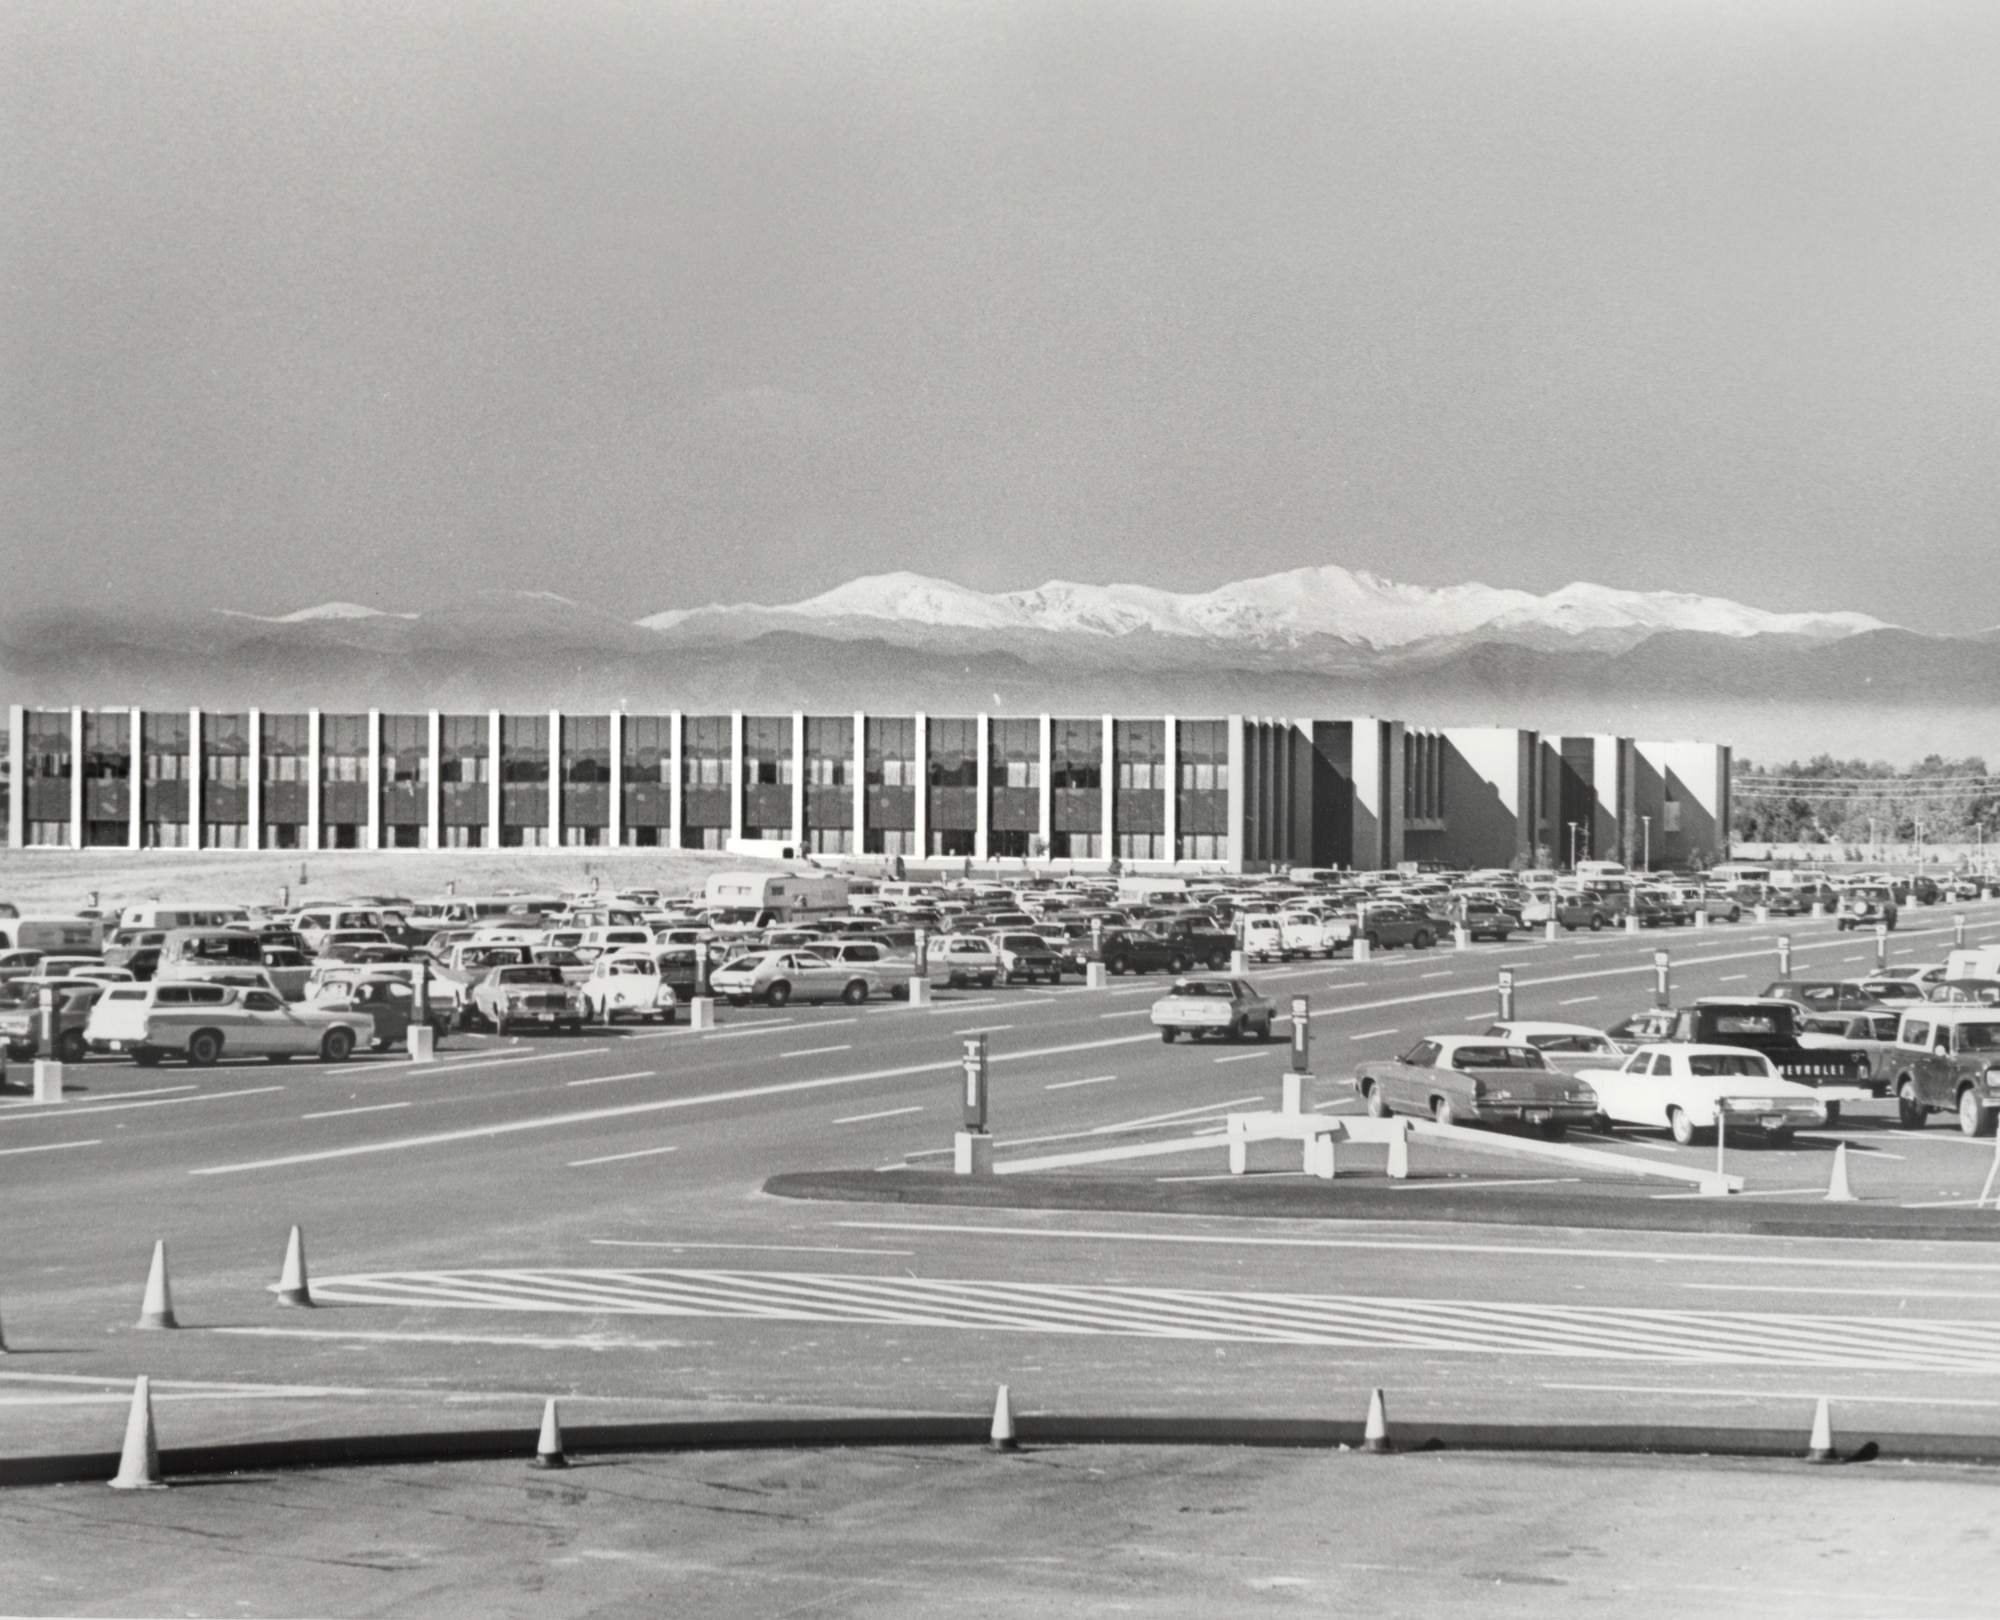 The Air Reserve Personnel Center at the former Lowry Air Force Base, Colo., in the spring of 1977, with Mt. Evans in the background. Members of ARPC moved to this building Sept. 1, 1976, from their original facility on 3800 York Street in north Denver. ARPC was established in Nov. 1, 1953, and opened their doors March 1, 1954. This feature story is the third of a monthly series celebrating ARPC's 60th birthday. (U.S. Air Force photo)